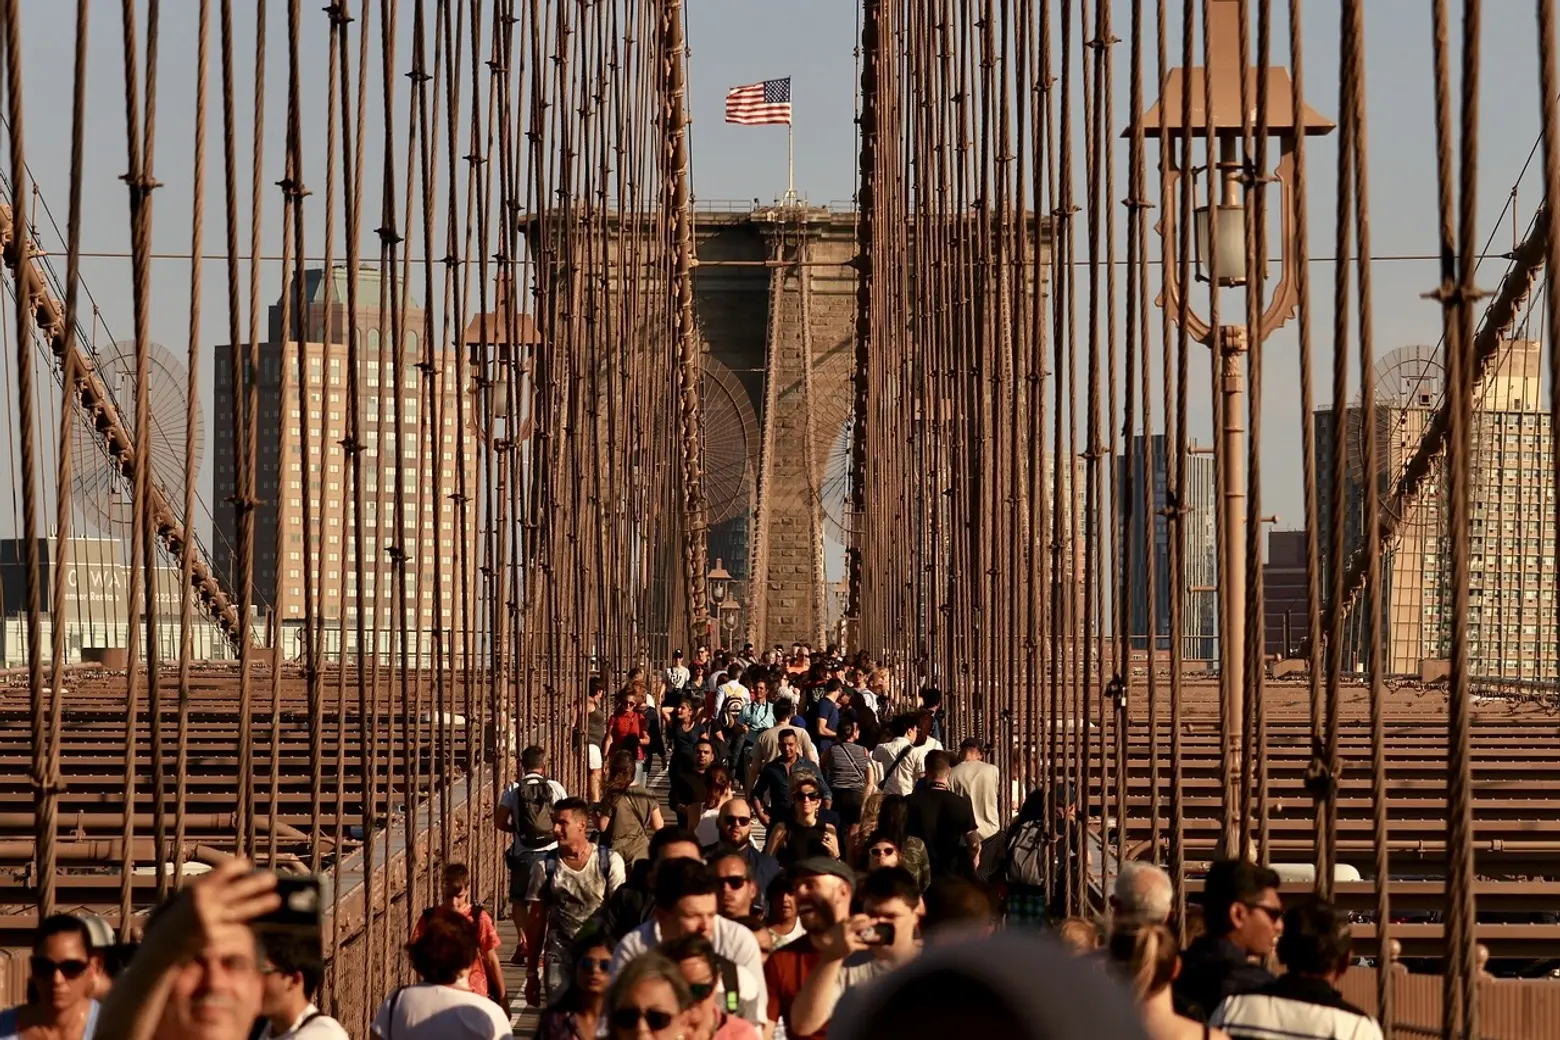 To relieve Brooklyn Bridge congestion, the city wants a bike-only entry and fewer vendors